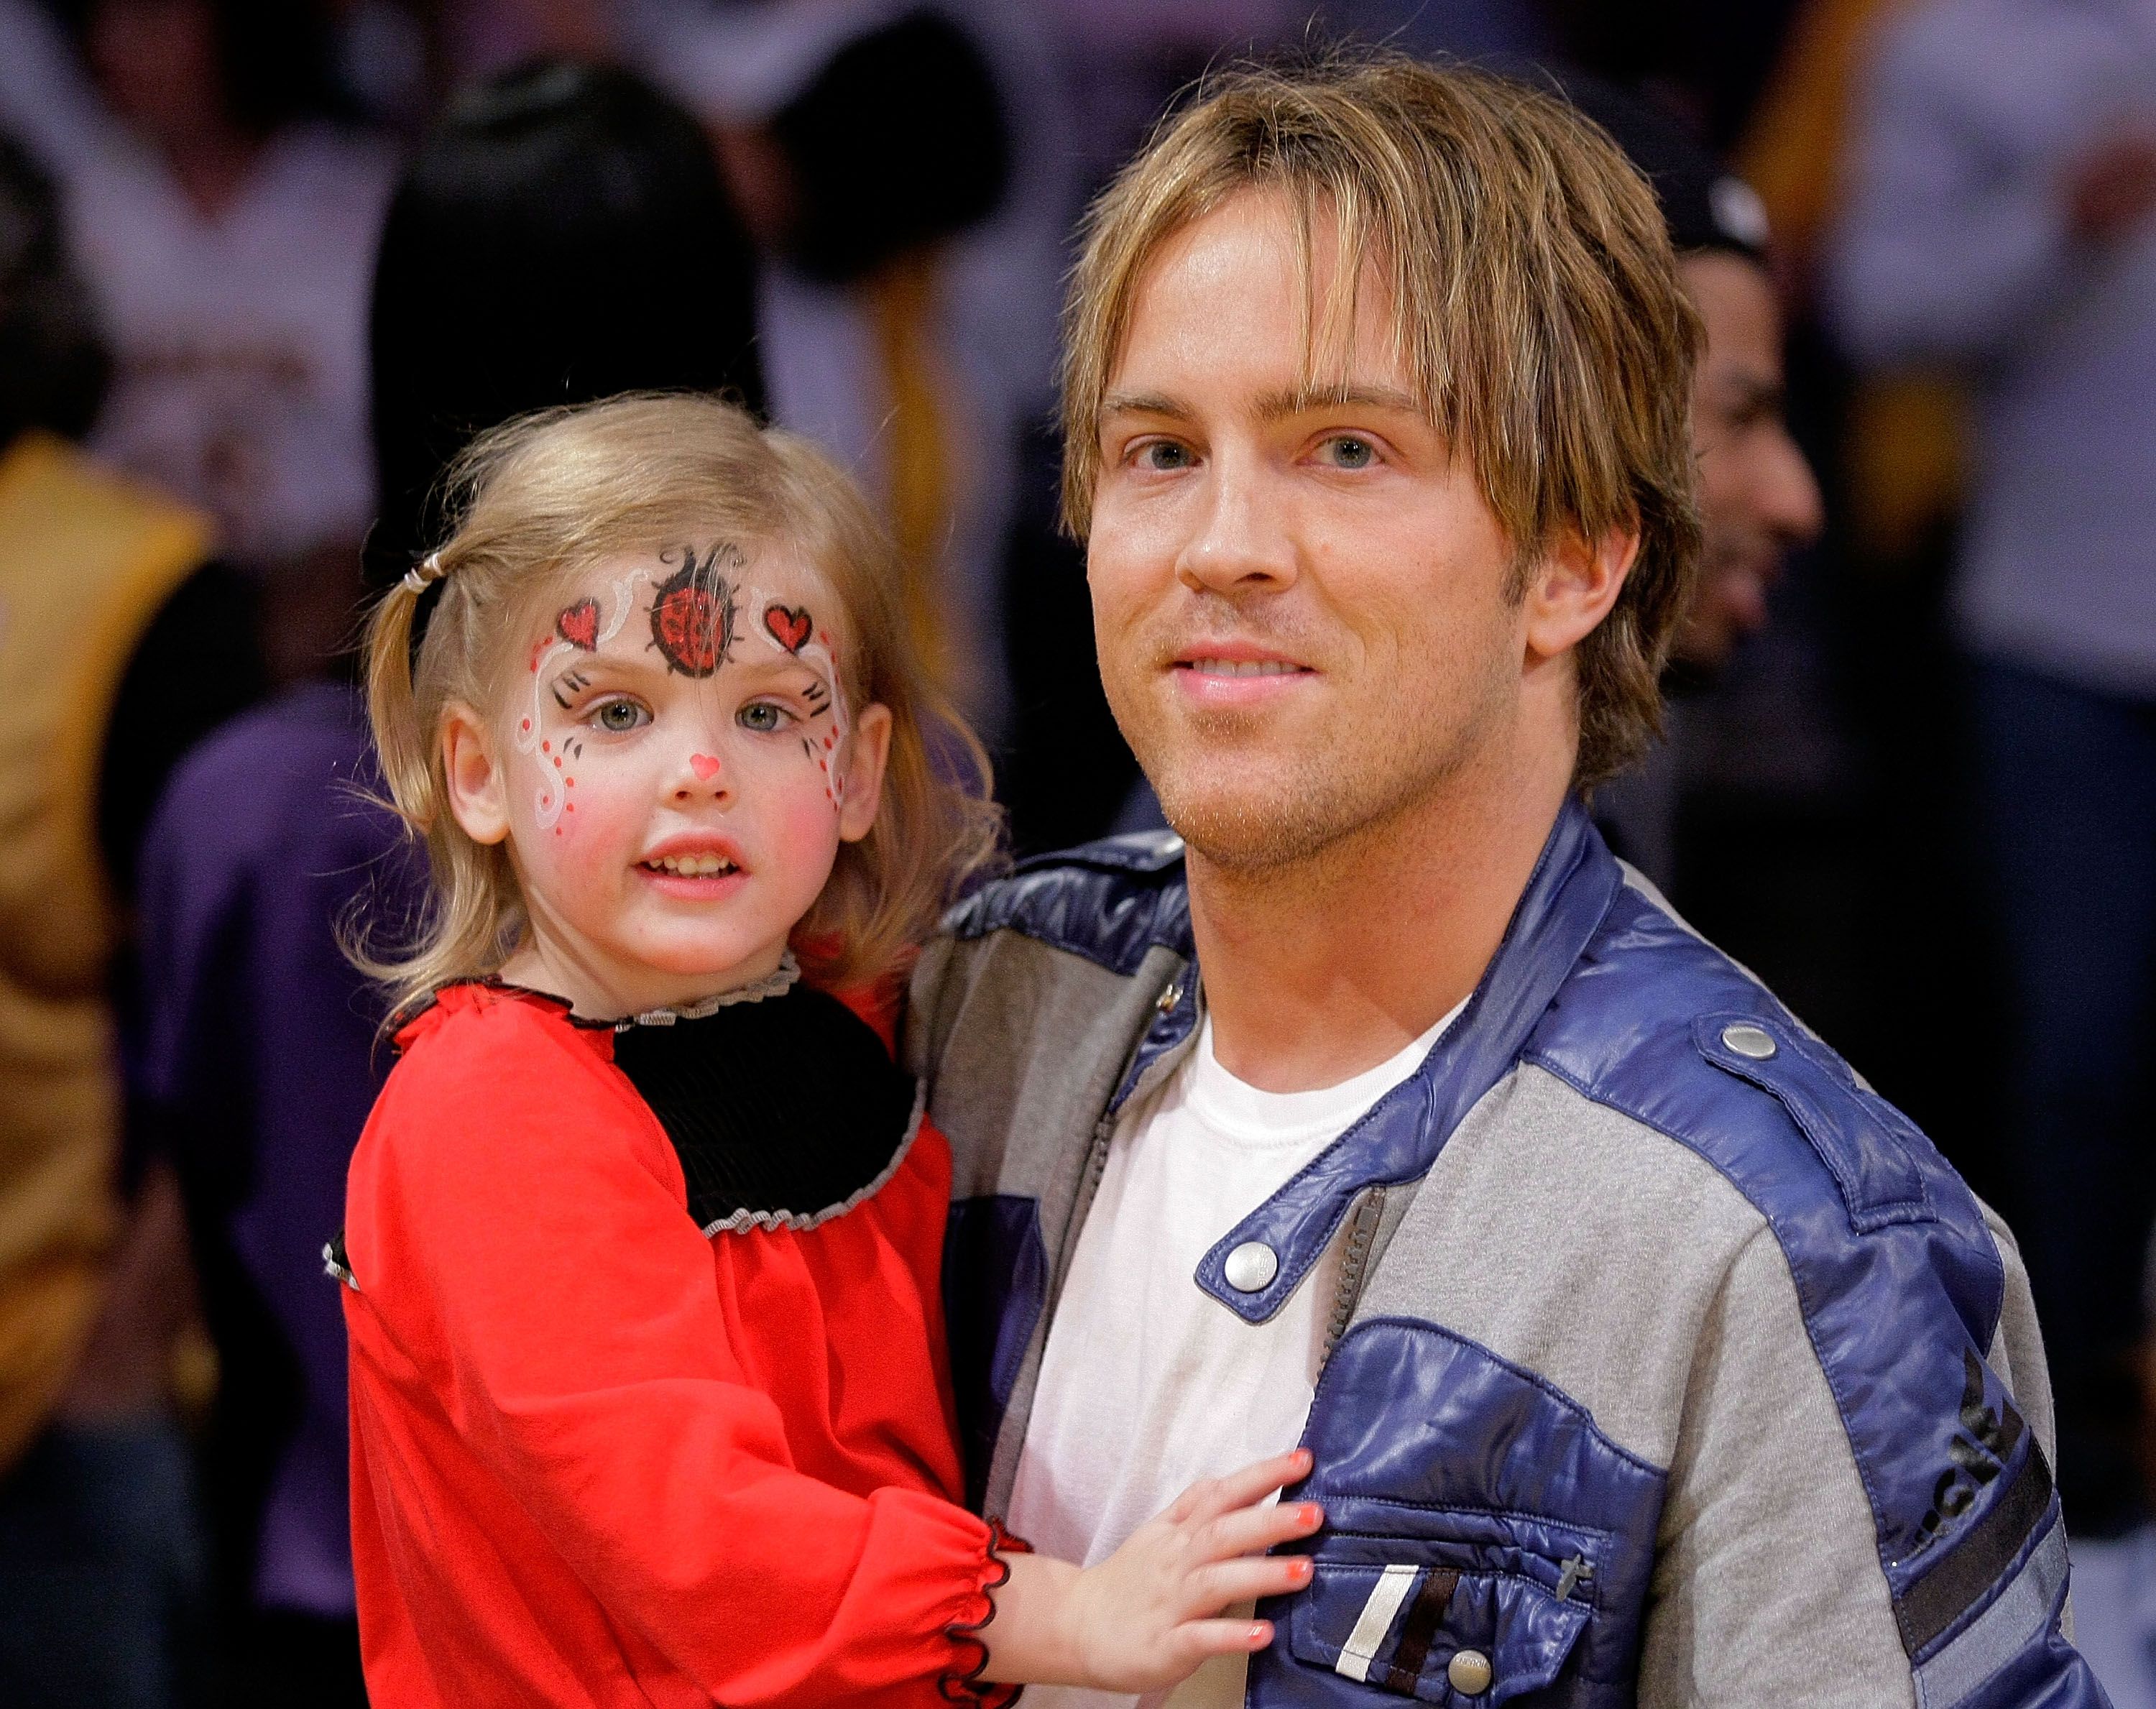 Larry Birkhead and his daughter Dannielynn Birkhead during a game between the New Orleans Hornets and the Los Angeles Lakers at Staples Center on November 8, 2009 in Los Angeles, California. | Source: Getty Images